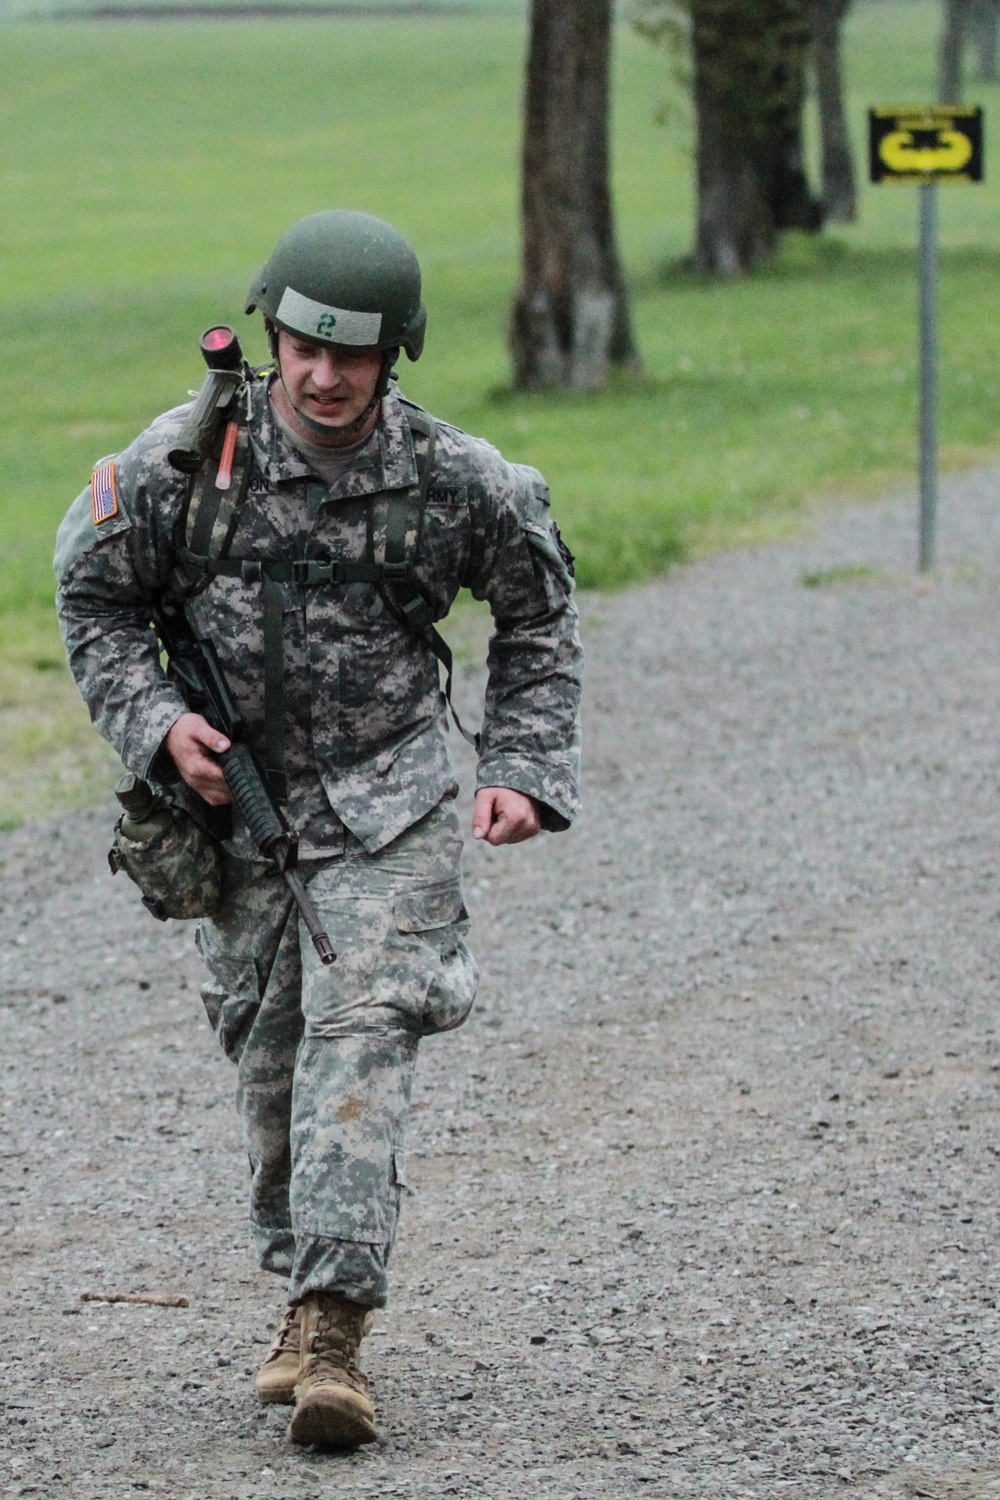 Strike amputee soldier nears 12-mile finish line